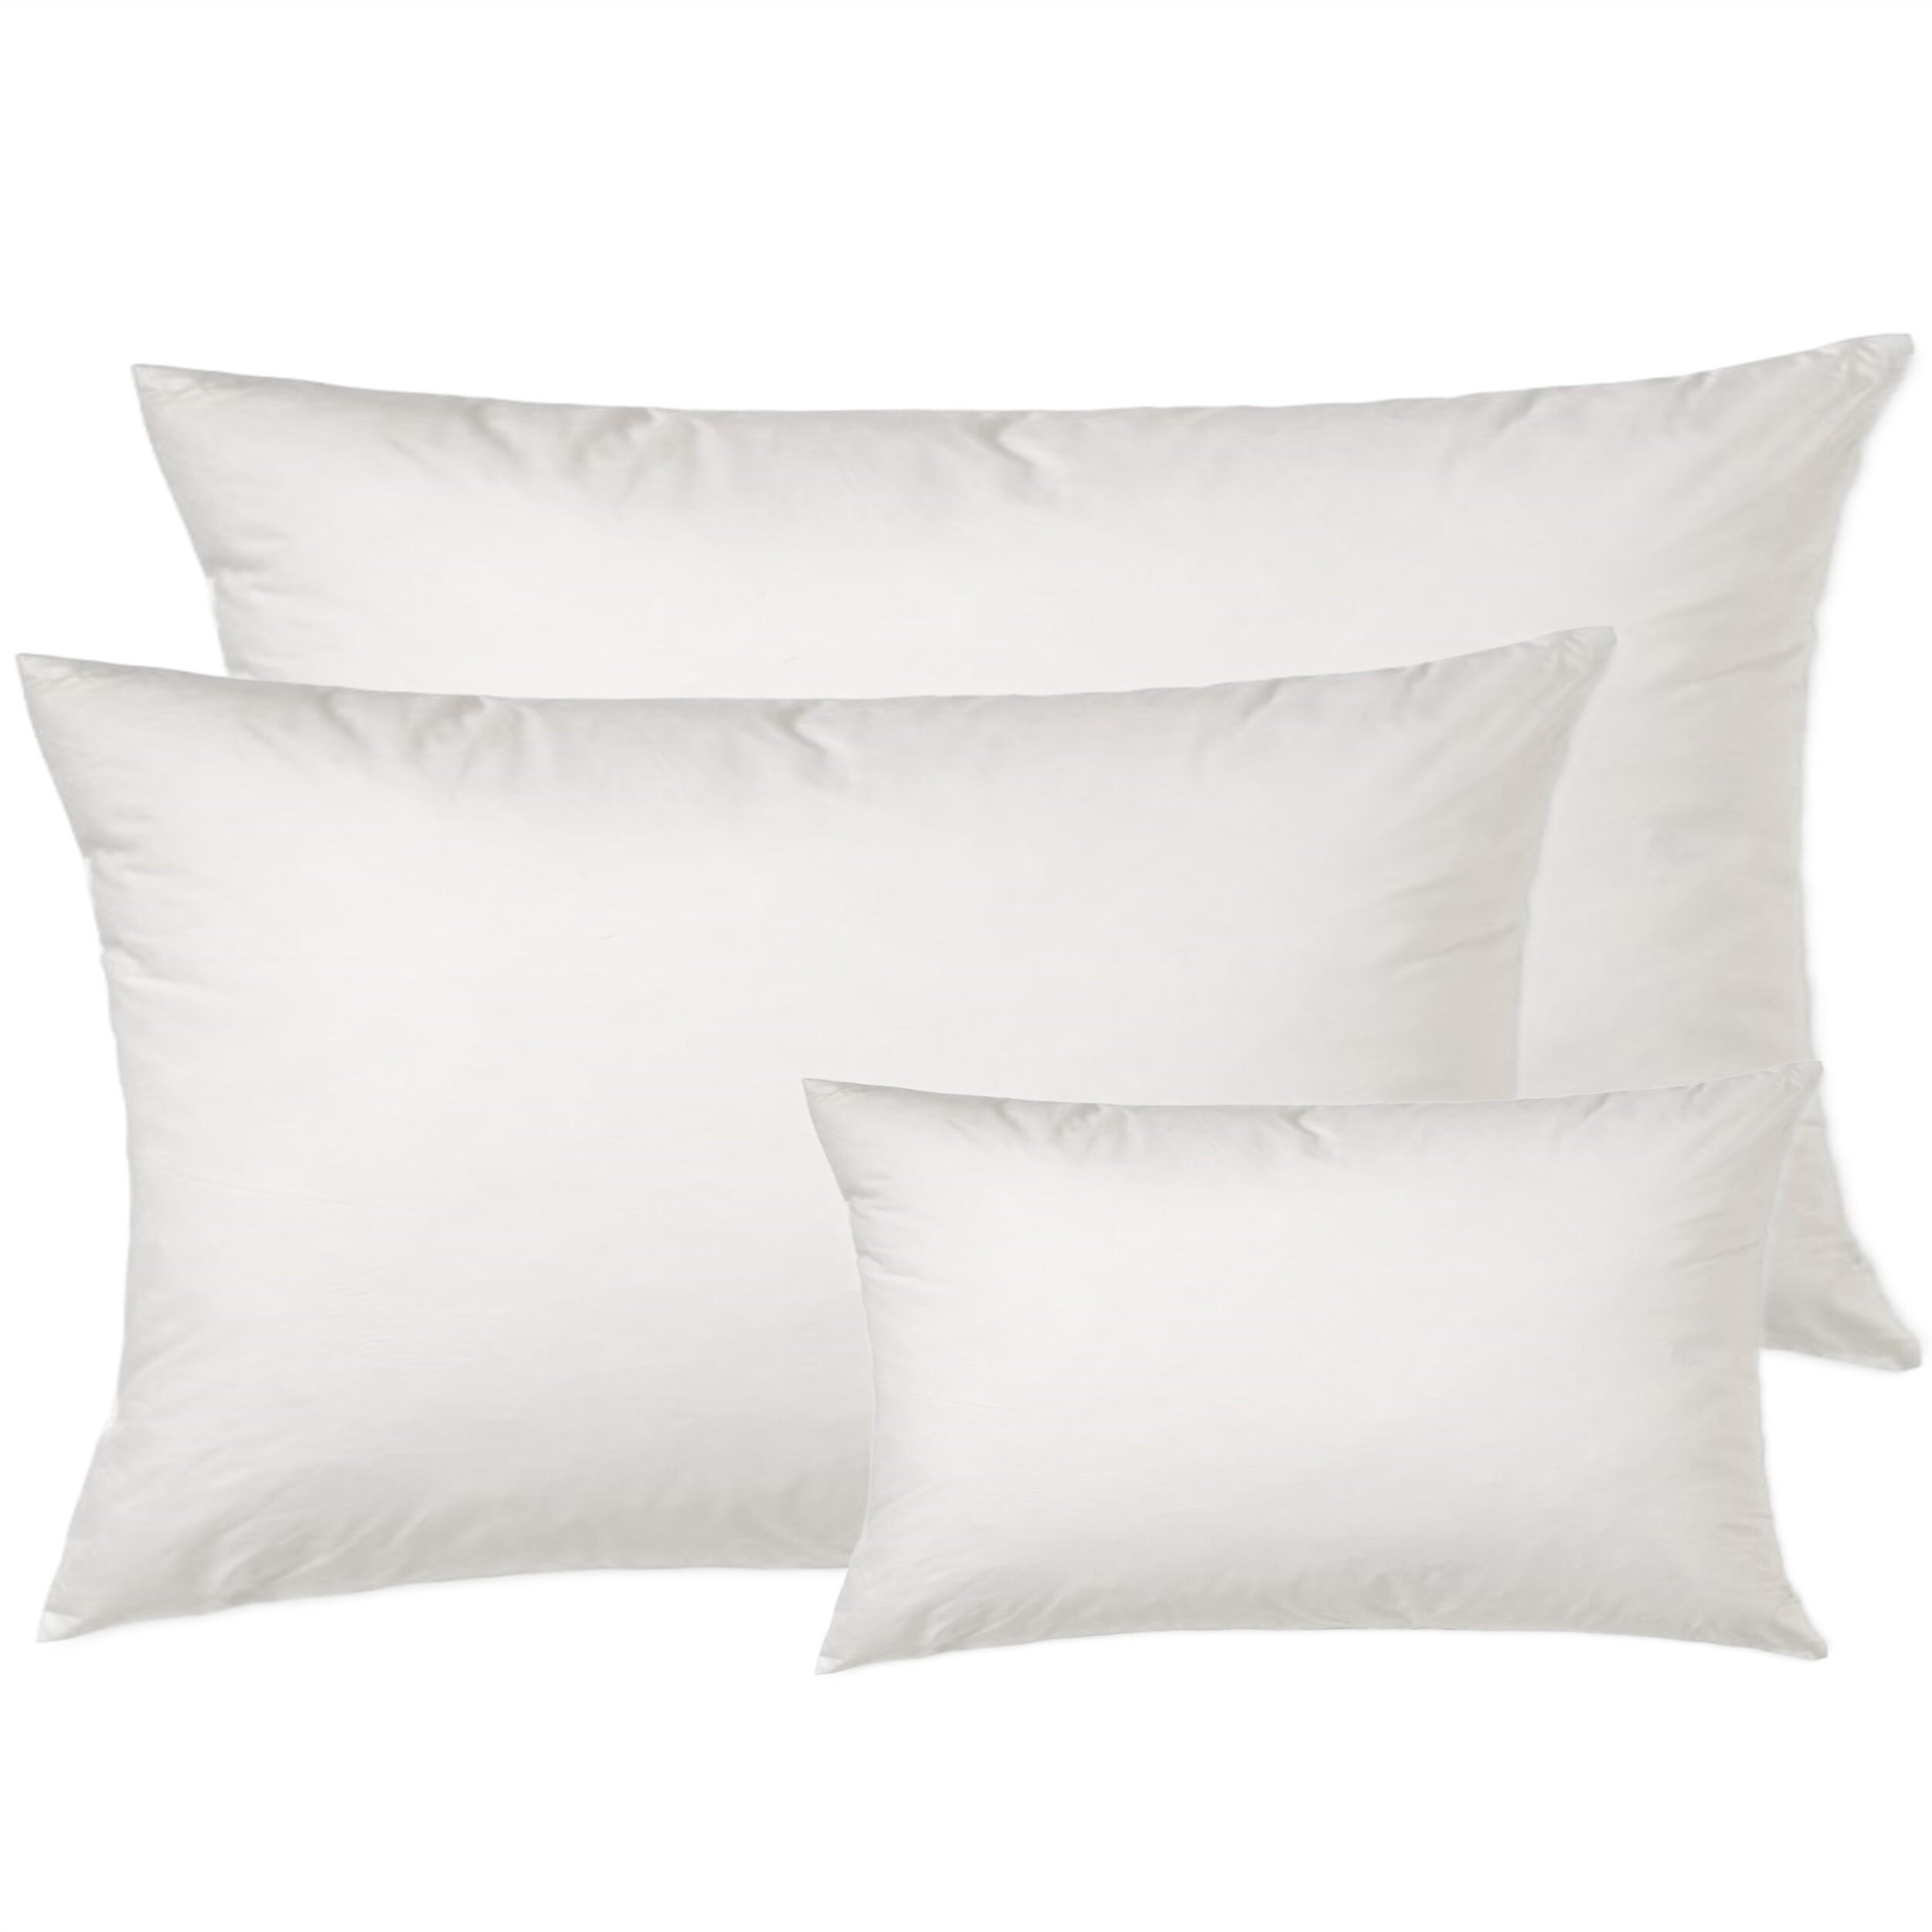 Eurotex 100% Cotton Pillow Inserts 20x30 - Comfy Cotton Cover Filled with Cotton Fibres for Sham, Fluffy Sleeping Bed Pillows, Size: 20 x 30, White